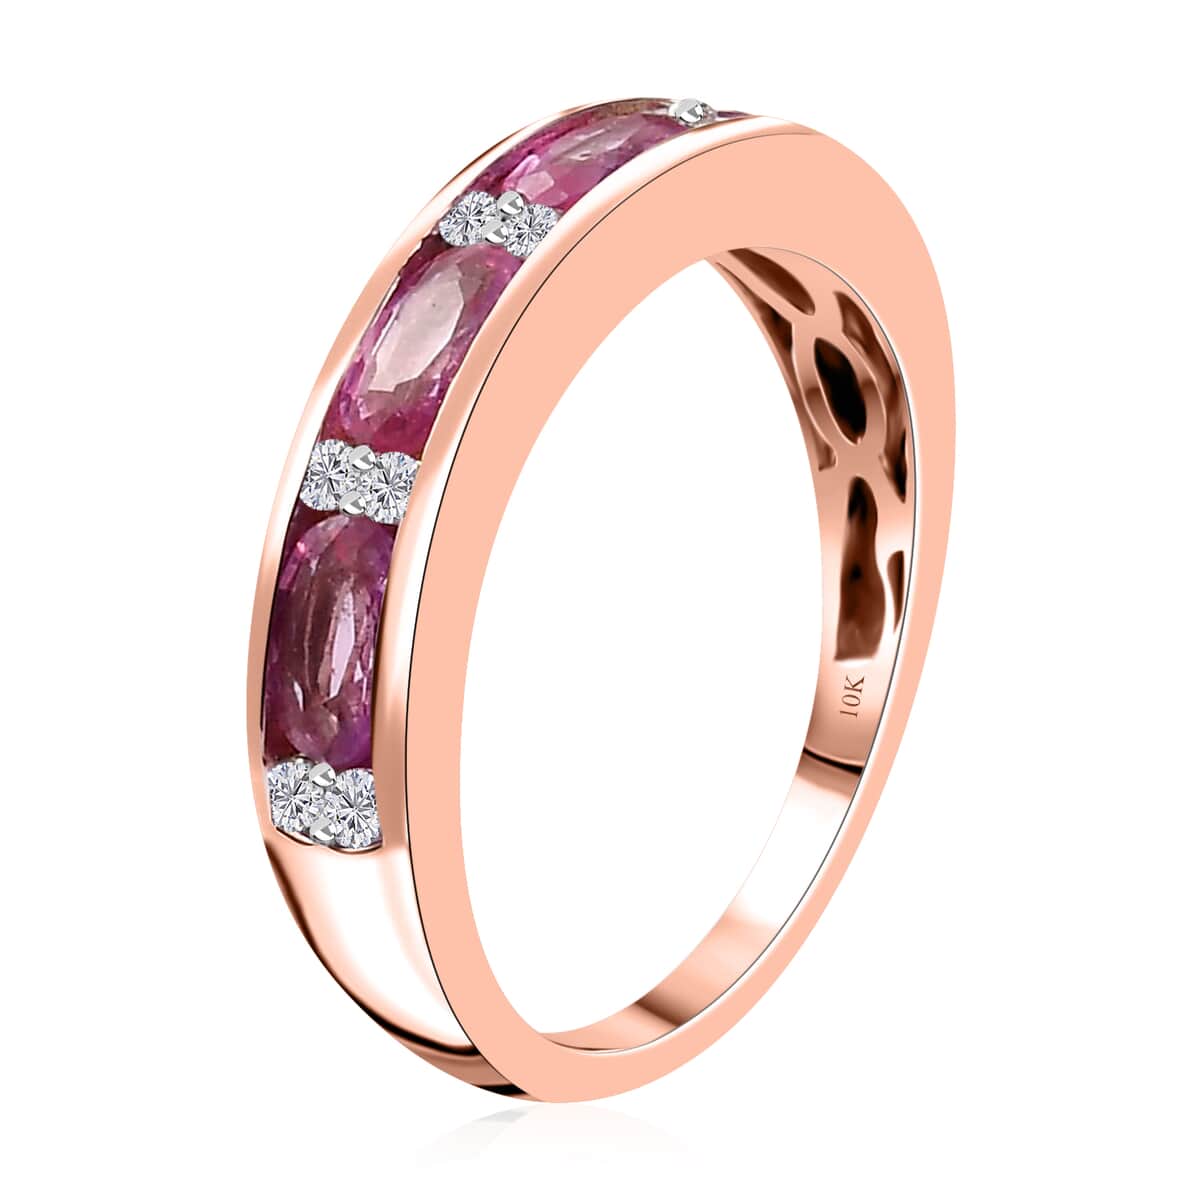 Luxoro 10K Rose Gold Premium Madagascar Pink Sapphire and Diamond Band Ring, Sapphire Jewelry, Birthday Anniversary Gift For Her 1.25 ctw (Size 7.0) image number 3